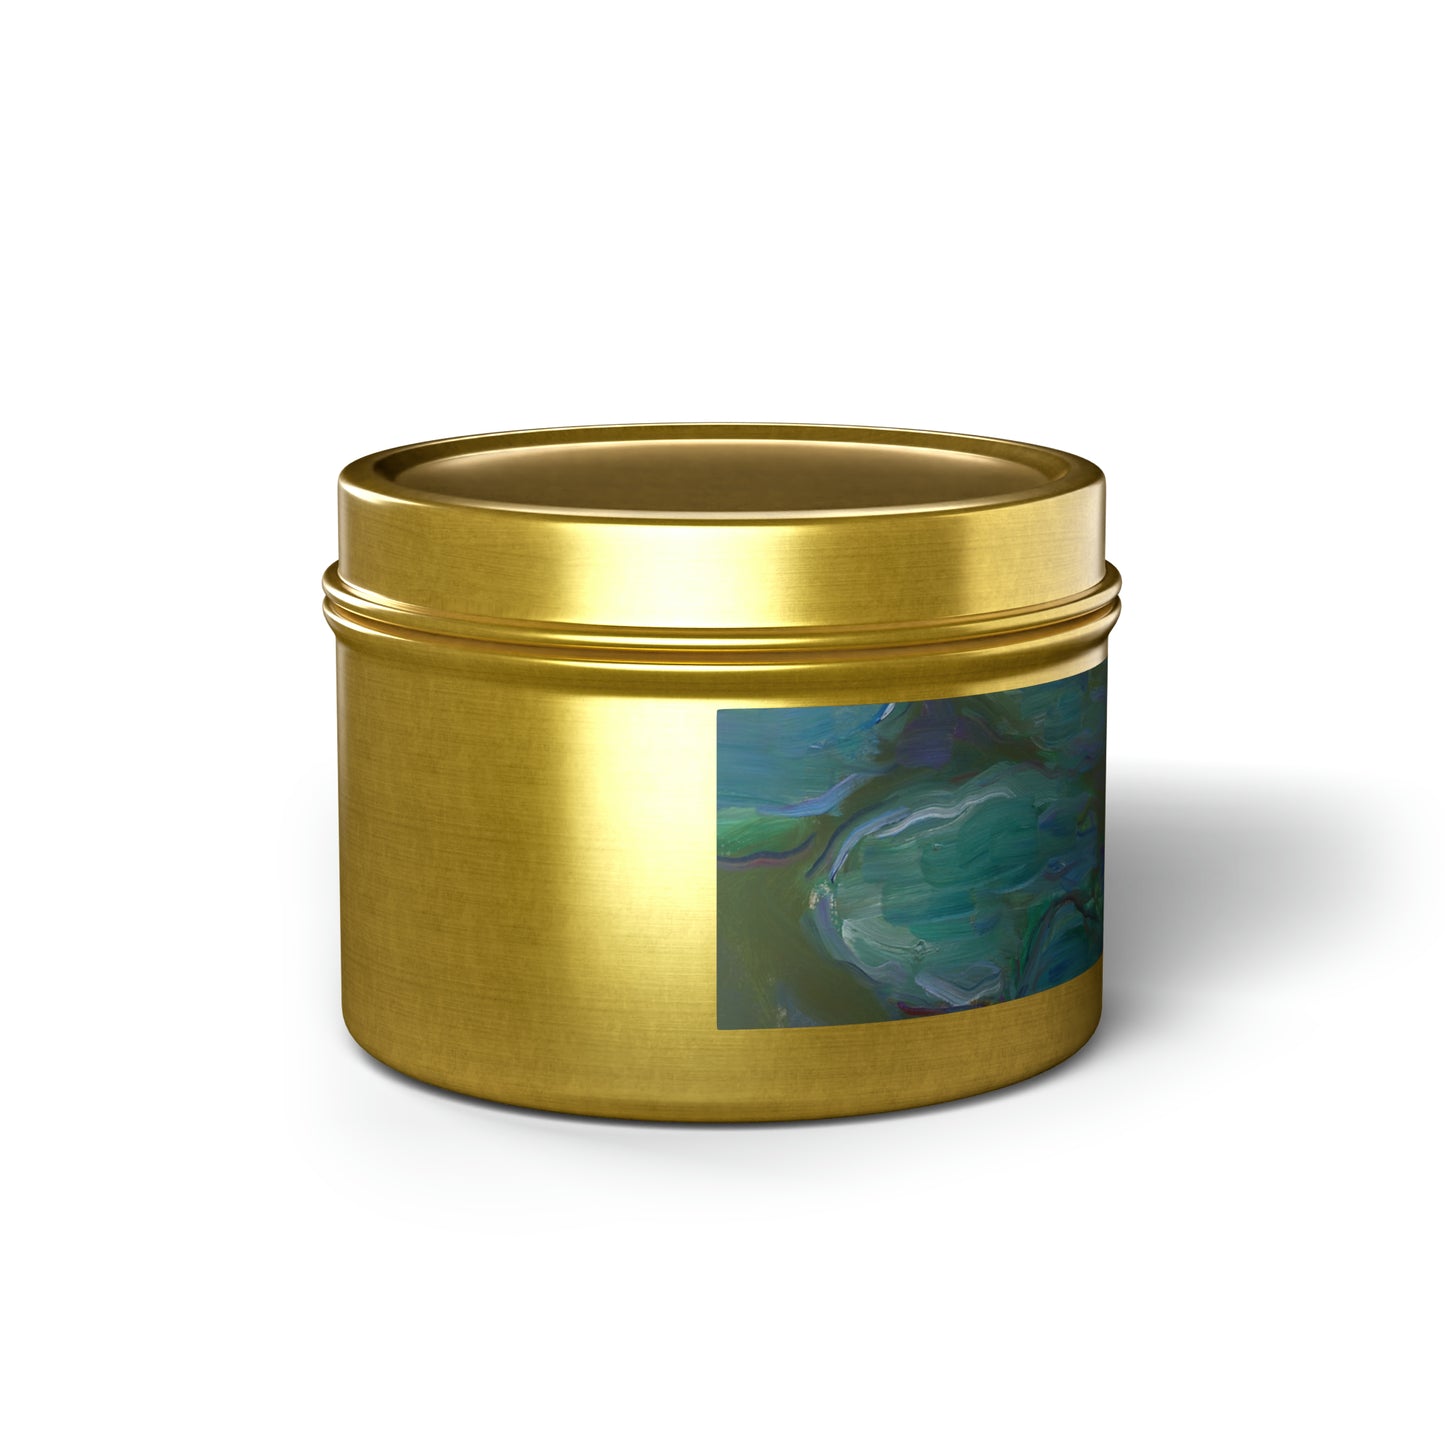 CLAUDE MONET - NYMPHEAS - TIN CANDLE - AMAZING A MUST HAVE!